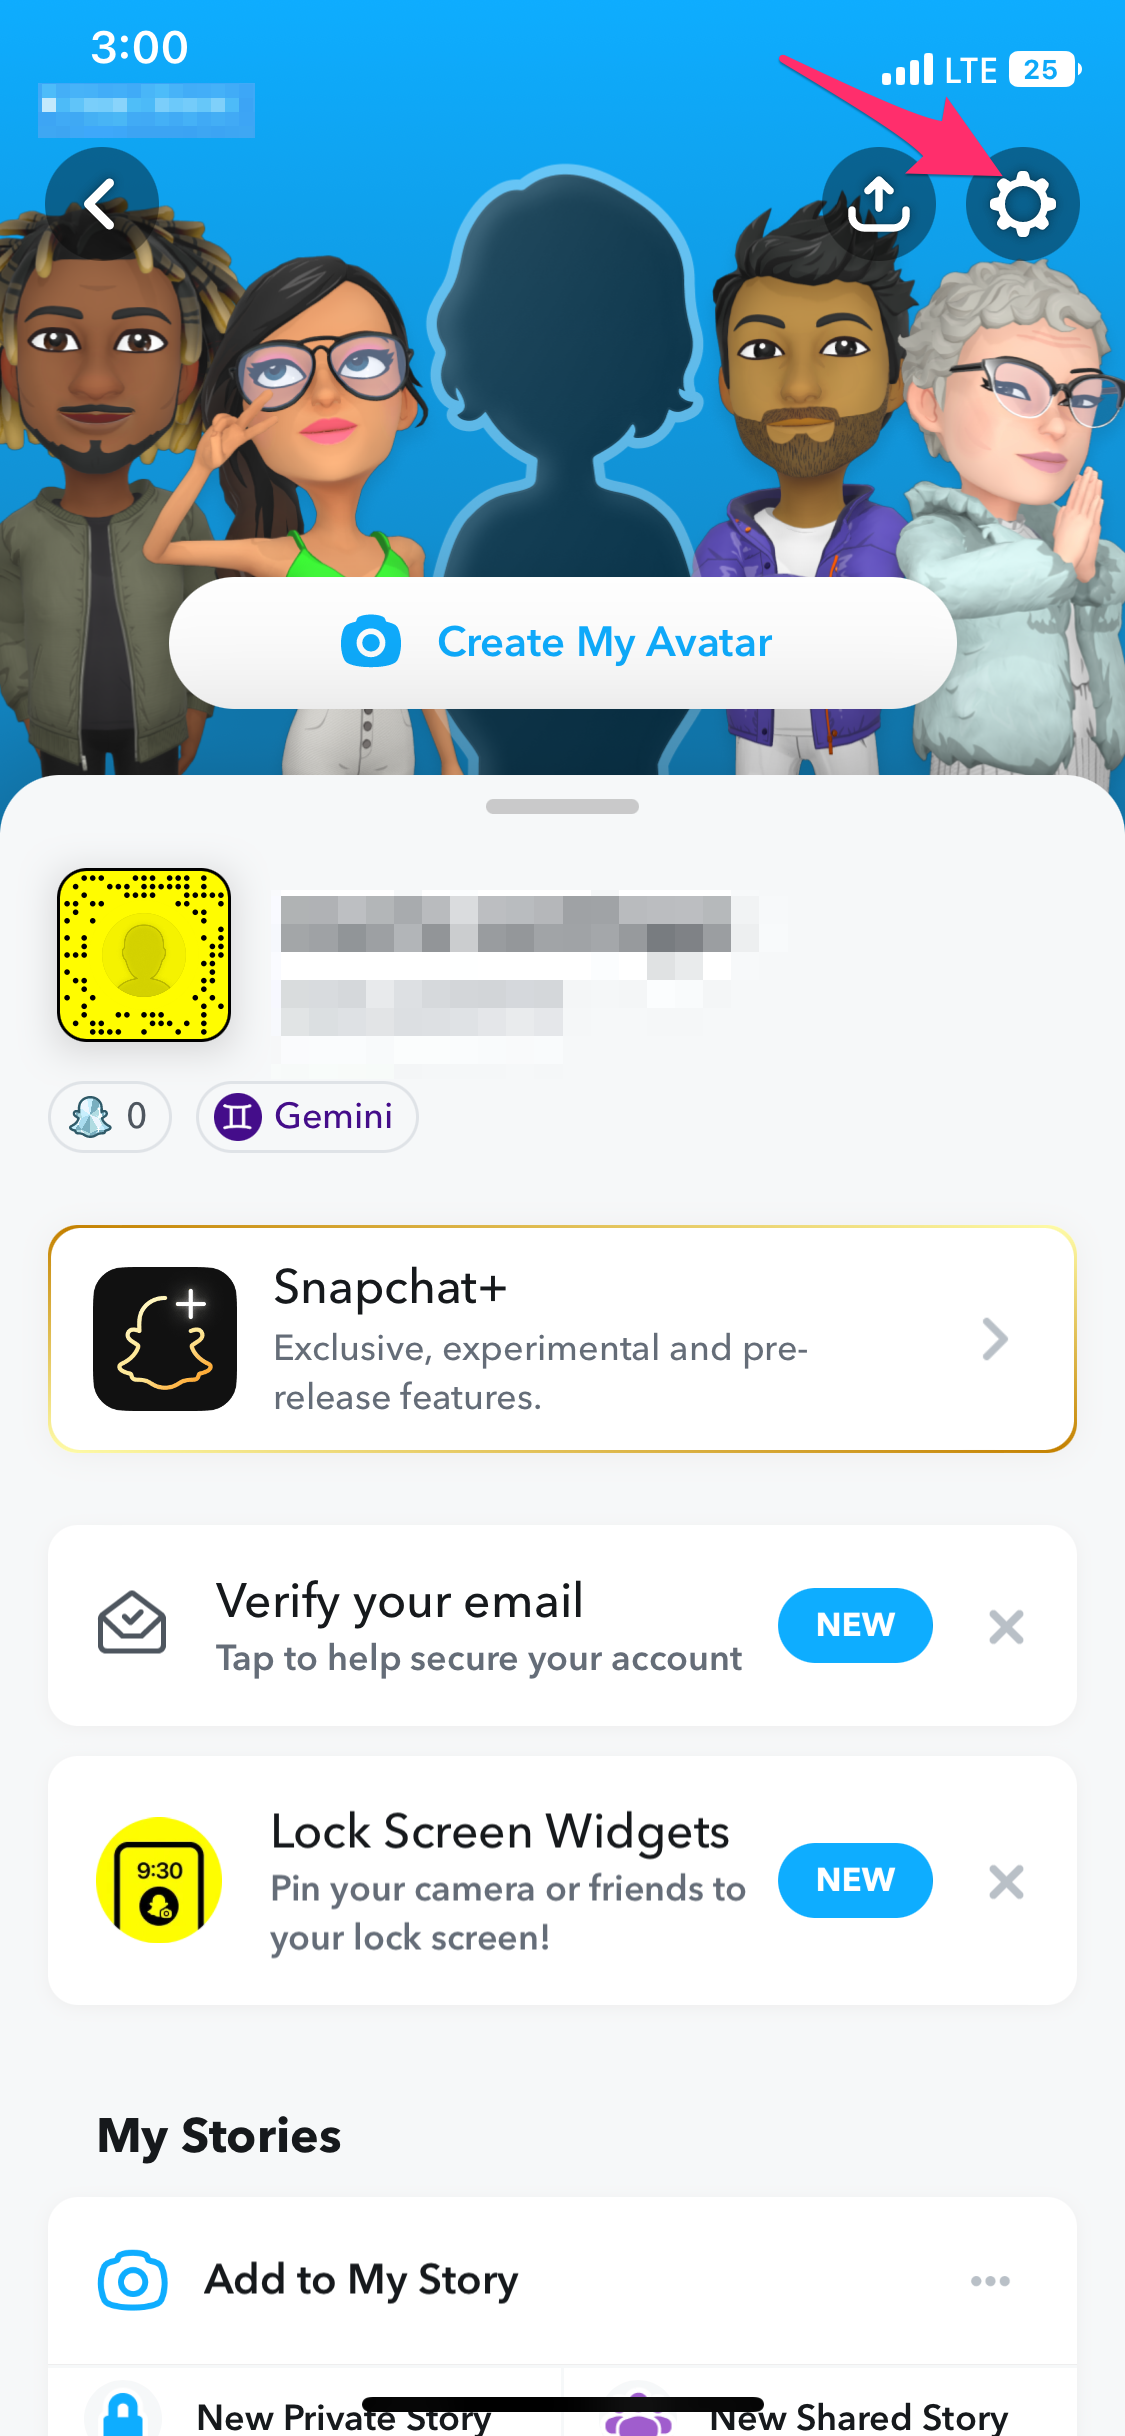 Open your Snapchat account